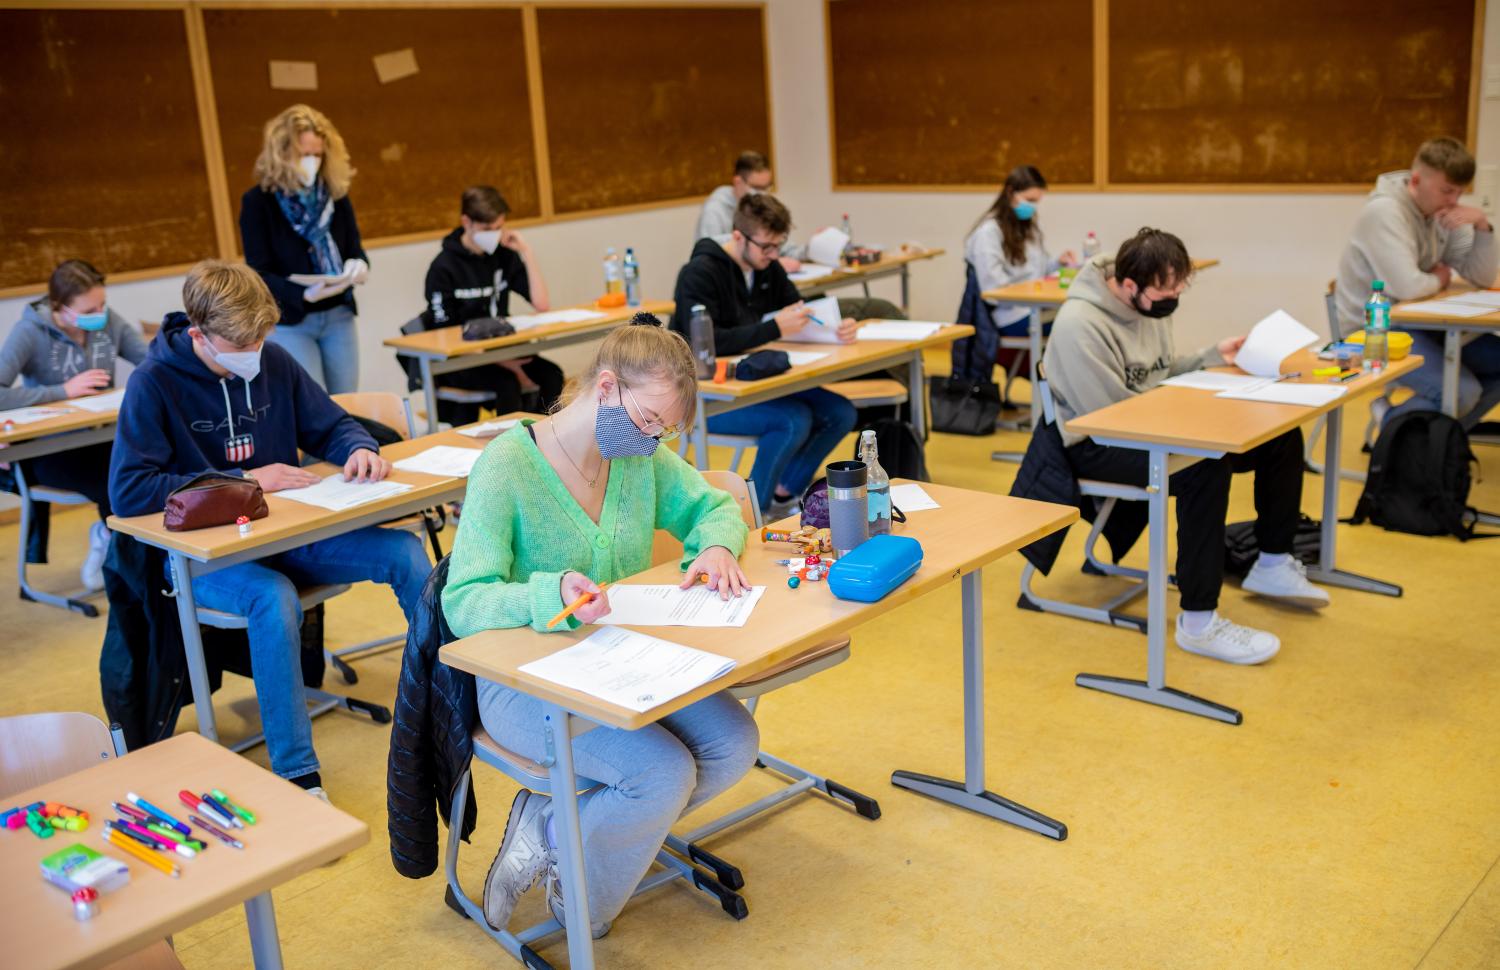 Pupils write their final exams in the subject "History" in a classroom at the Gymnasium Mellendorf in the region of Hanover. The Abitur examinations in Lower Saxony begin today.